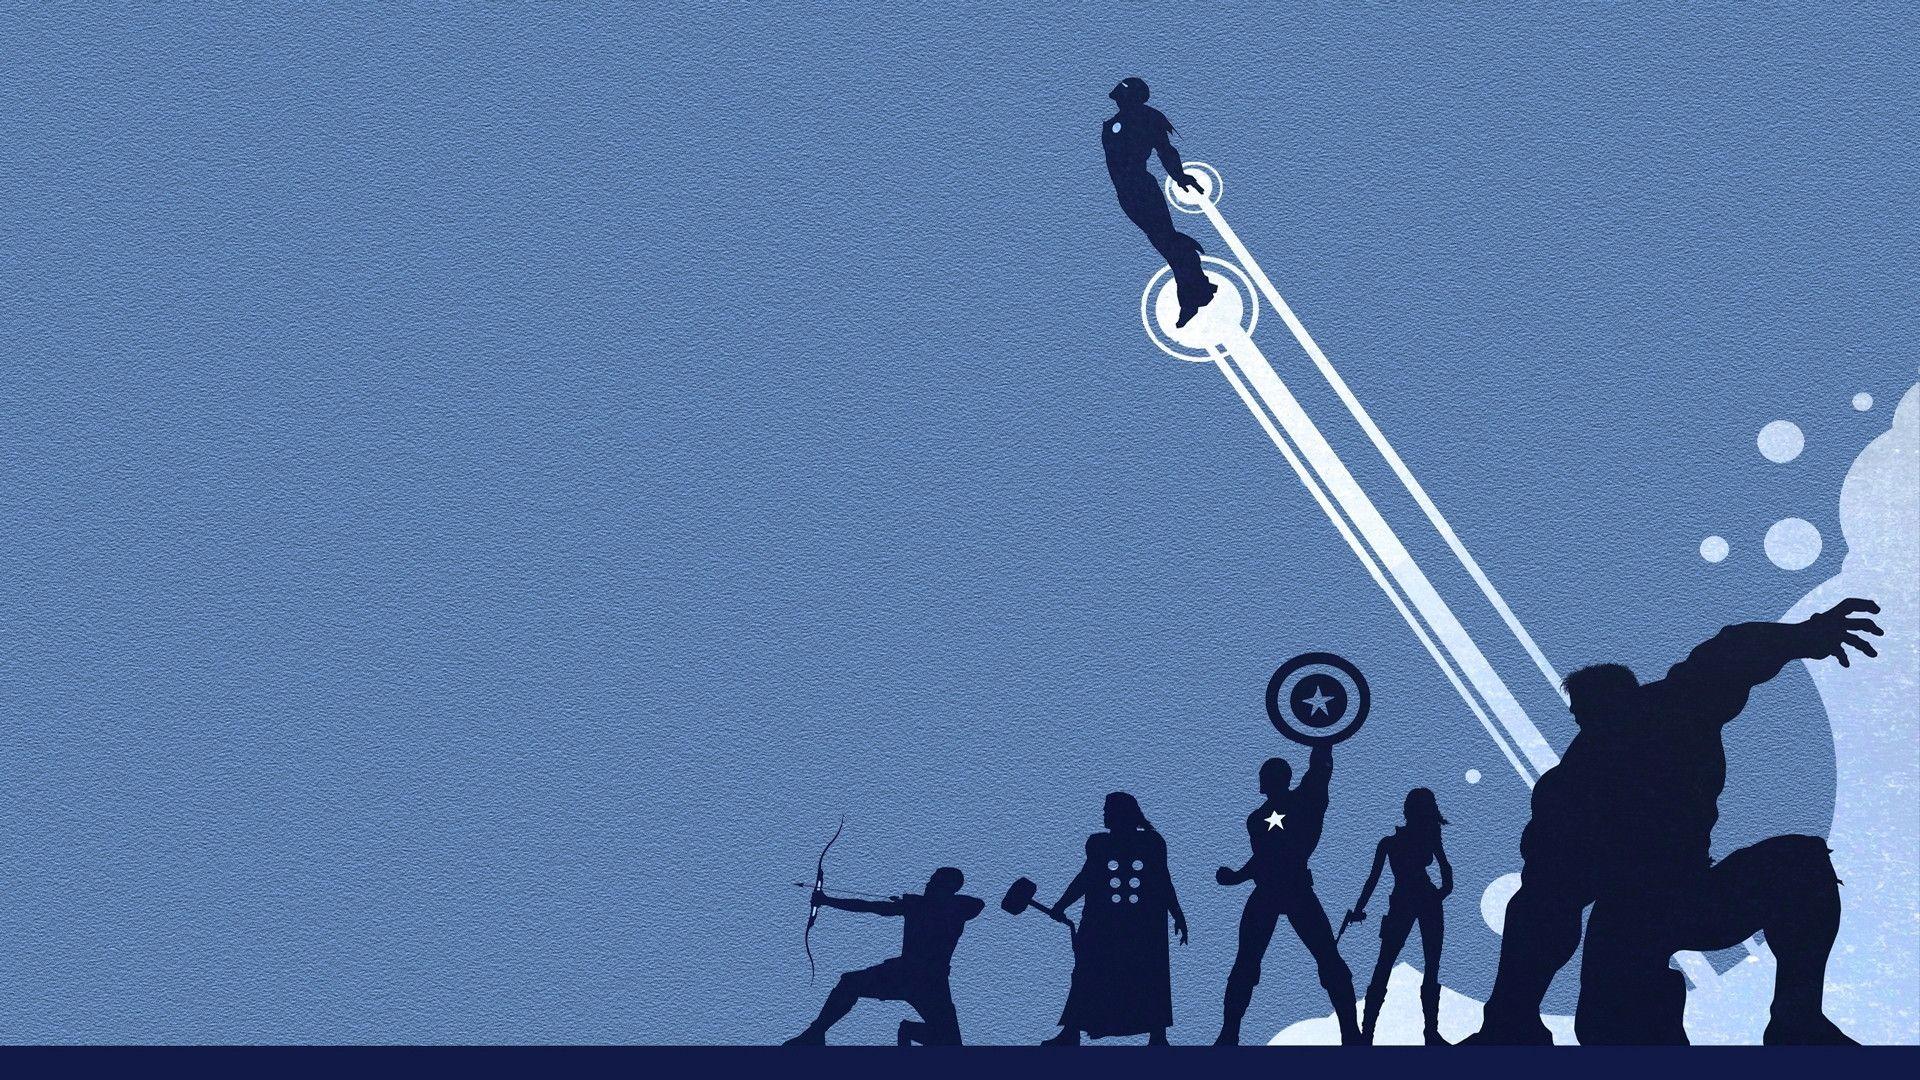 HD Marvel Wallpaper 1920x1080 (and a few higher)